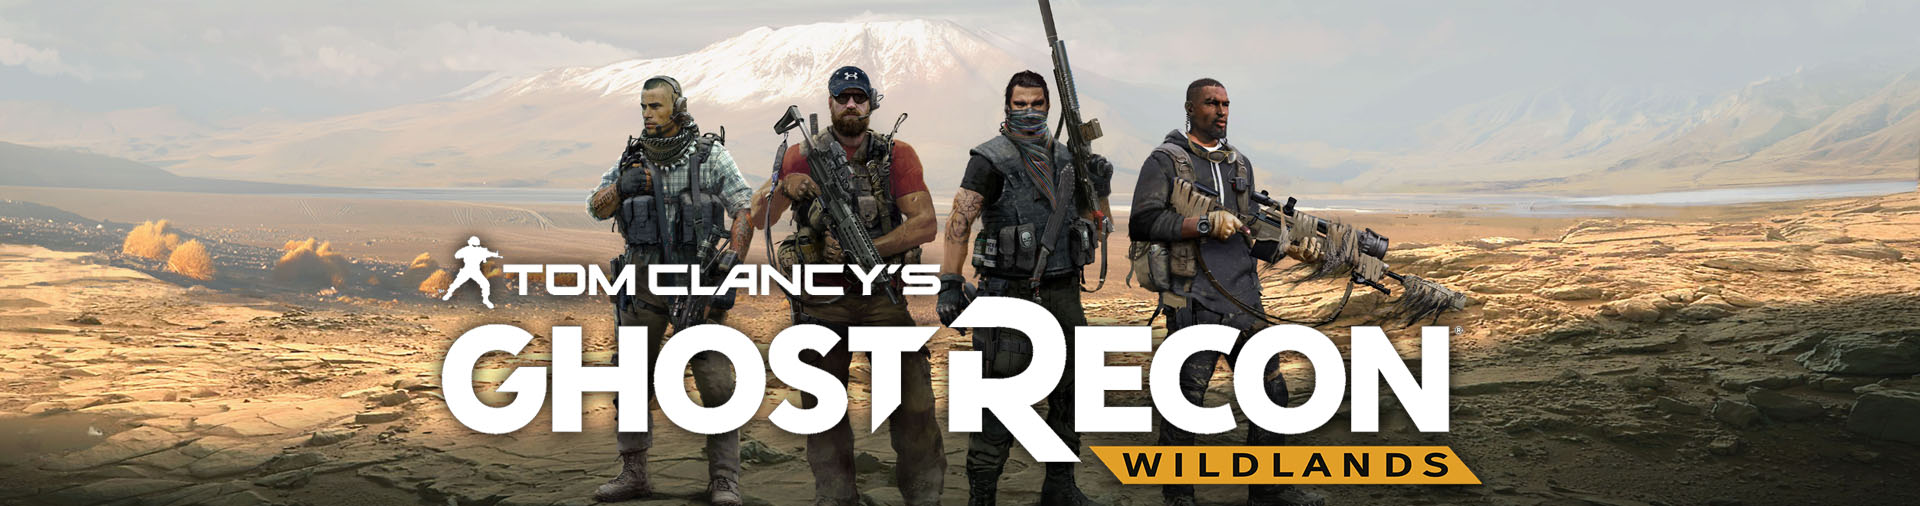 Tom Clancy's Ghost Recon® Wildlands Concept and 3D Art by GamecoStudios